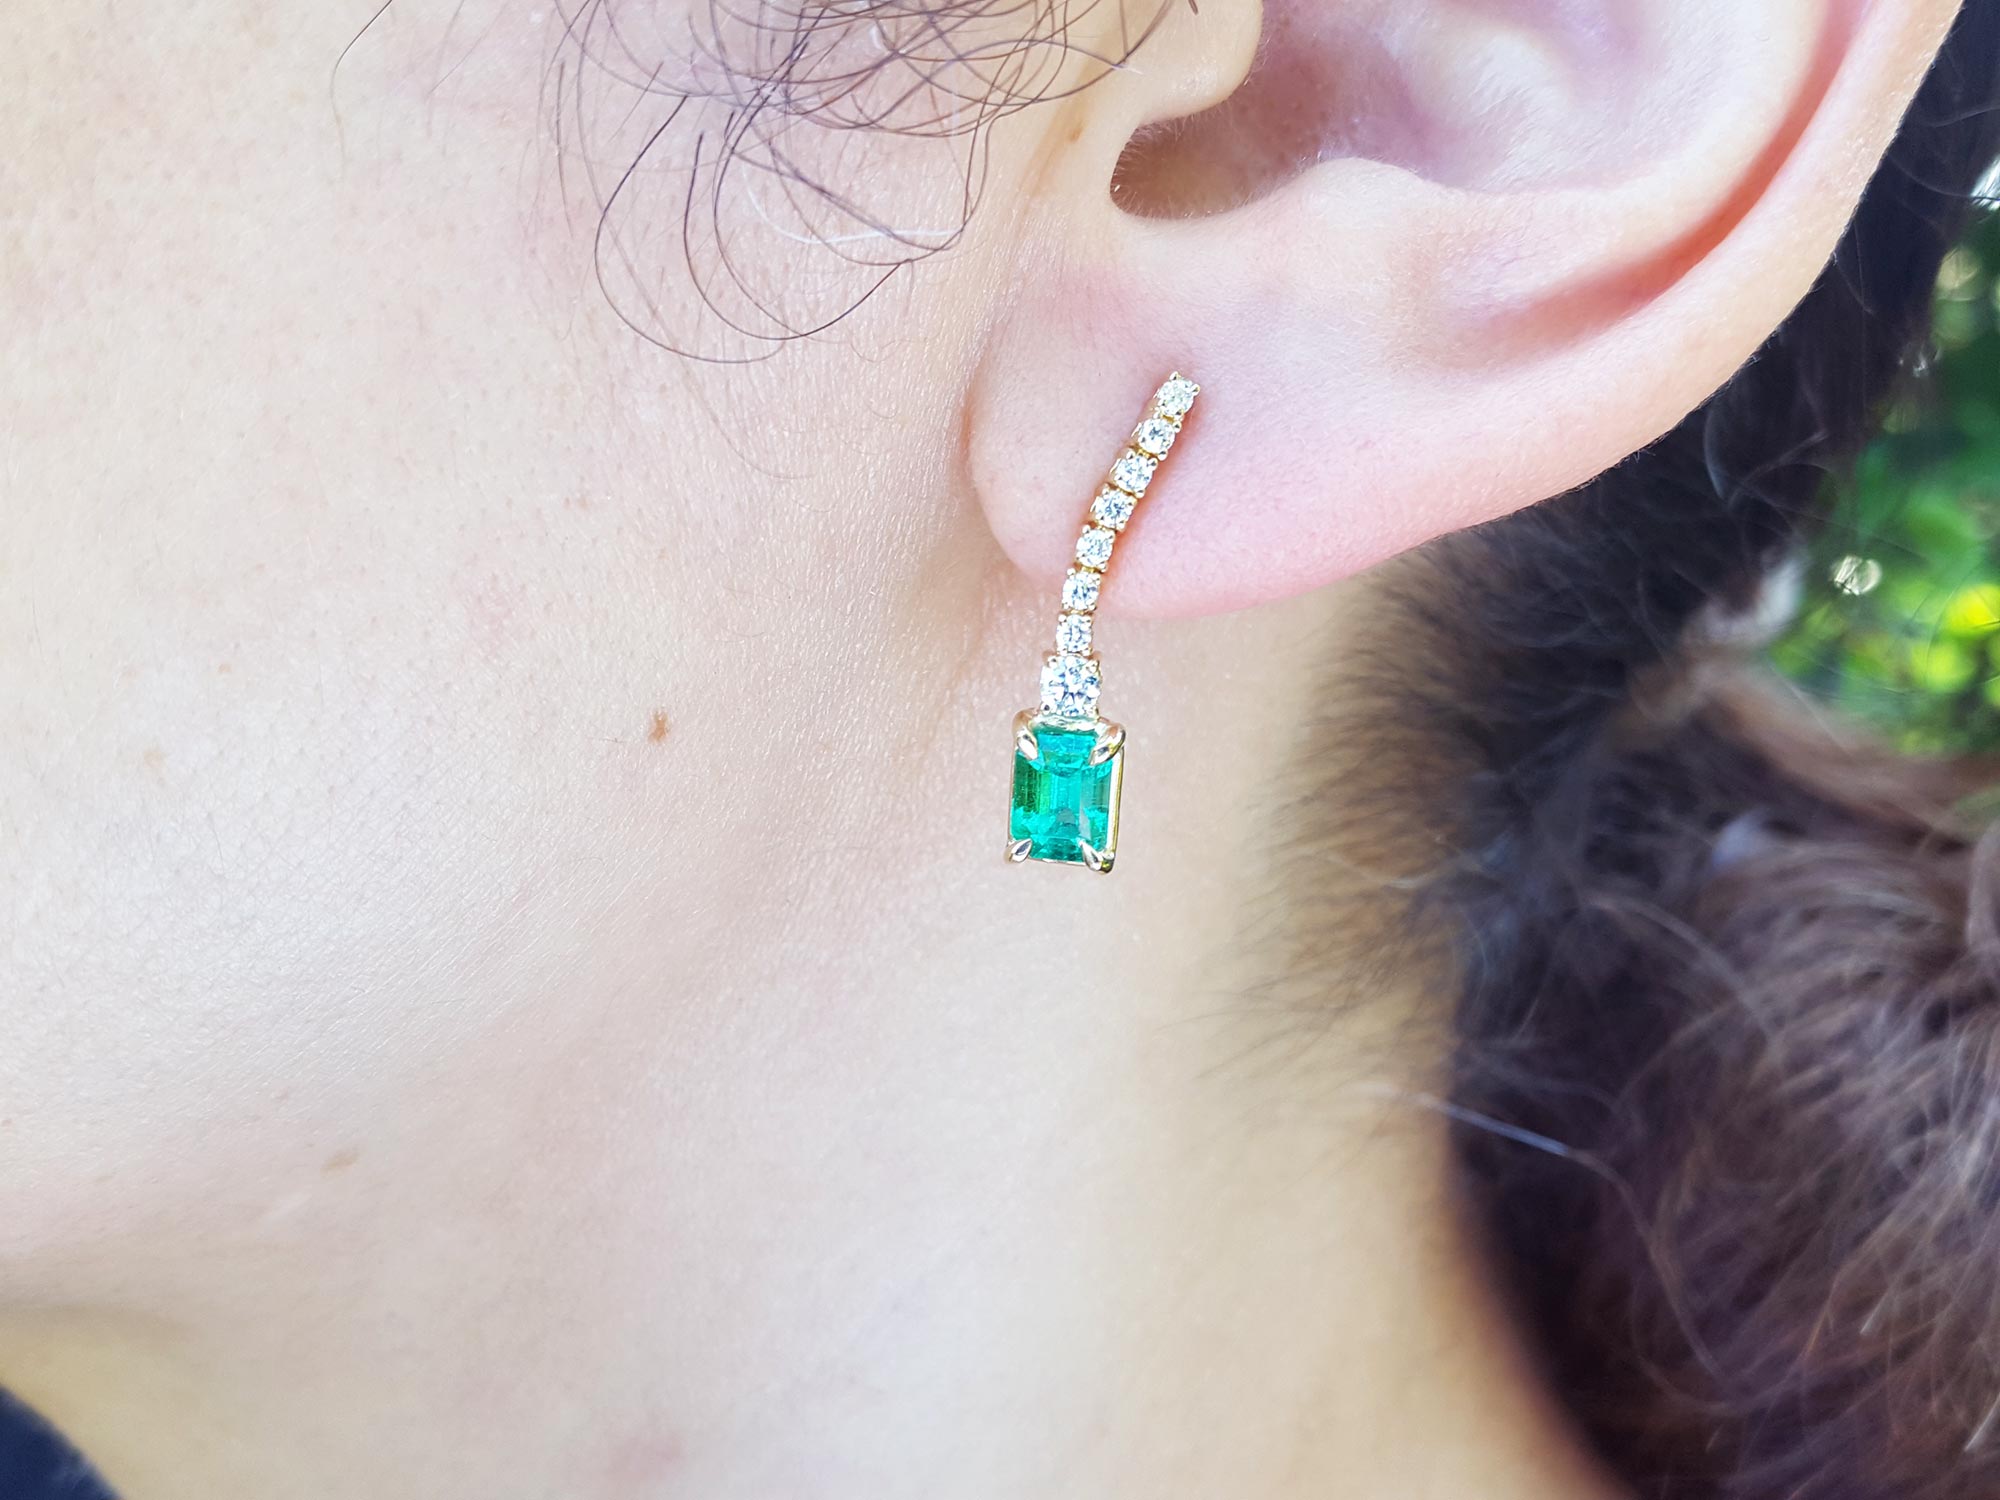 Authentic emerald earrings for sale